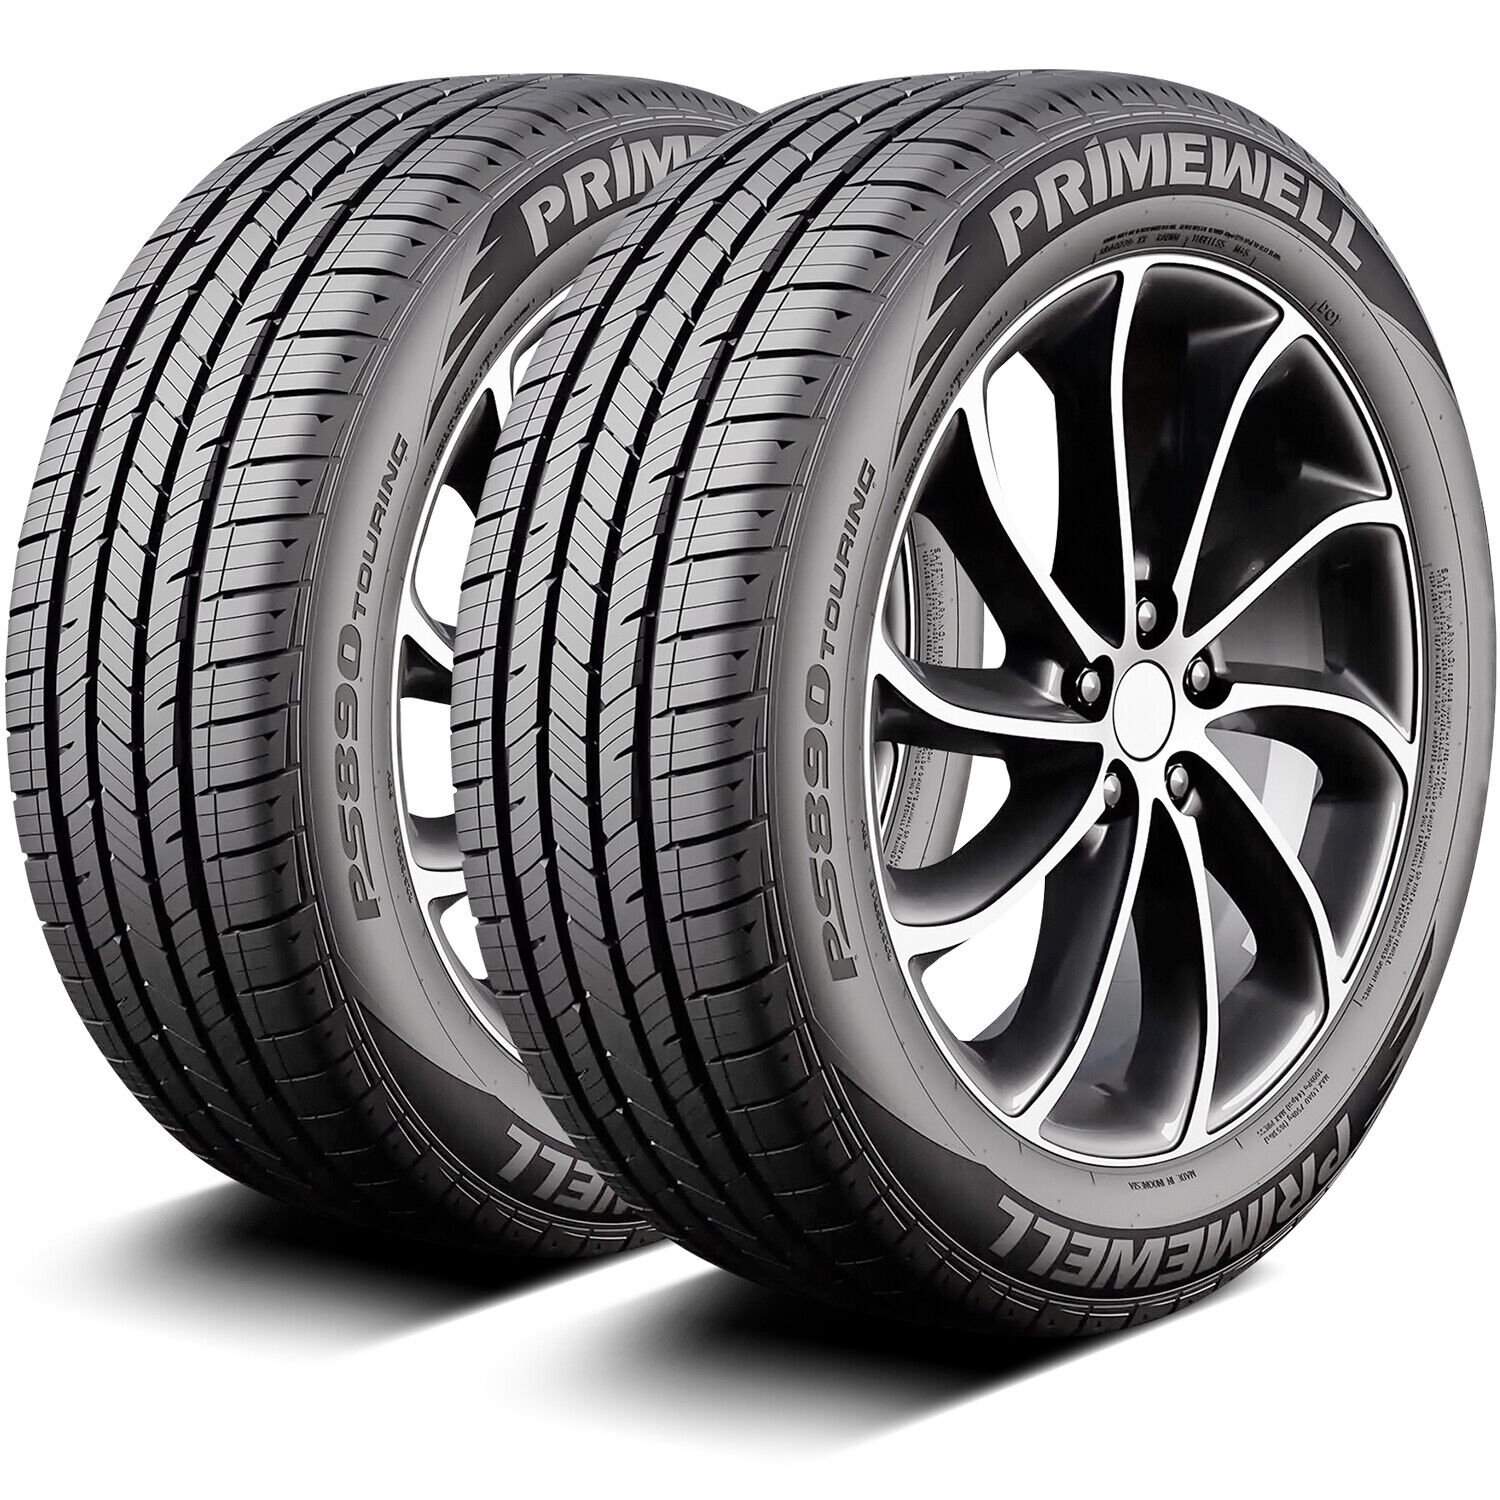 2 Tires Primewell PS890 Touring 195/60R15 88H AS A/S All Season